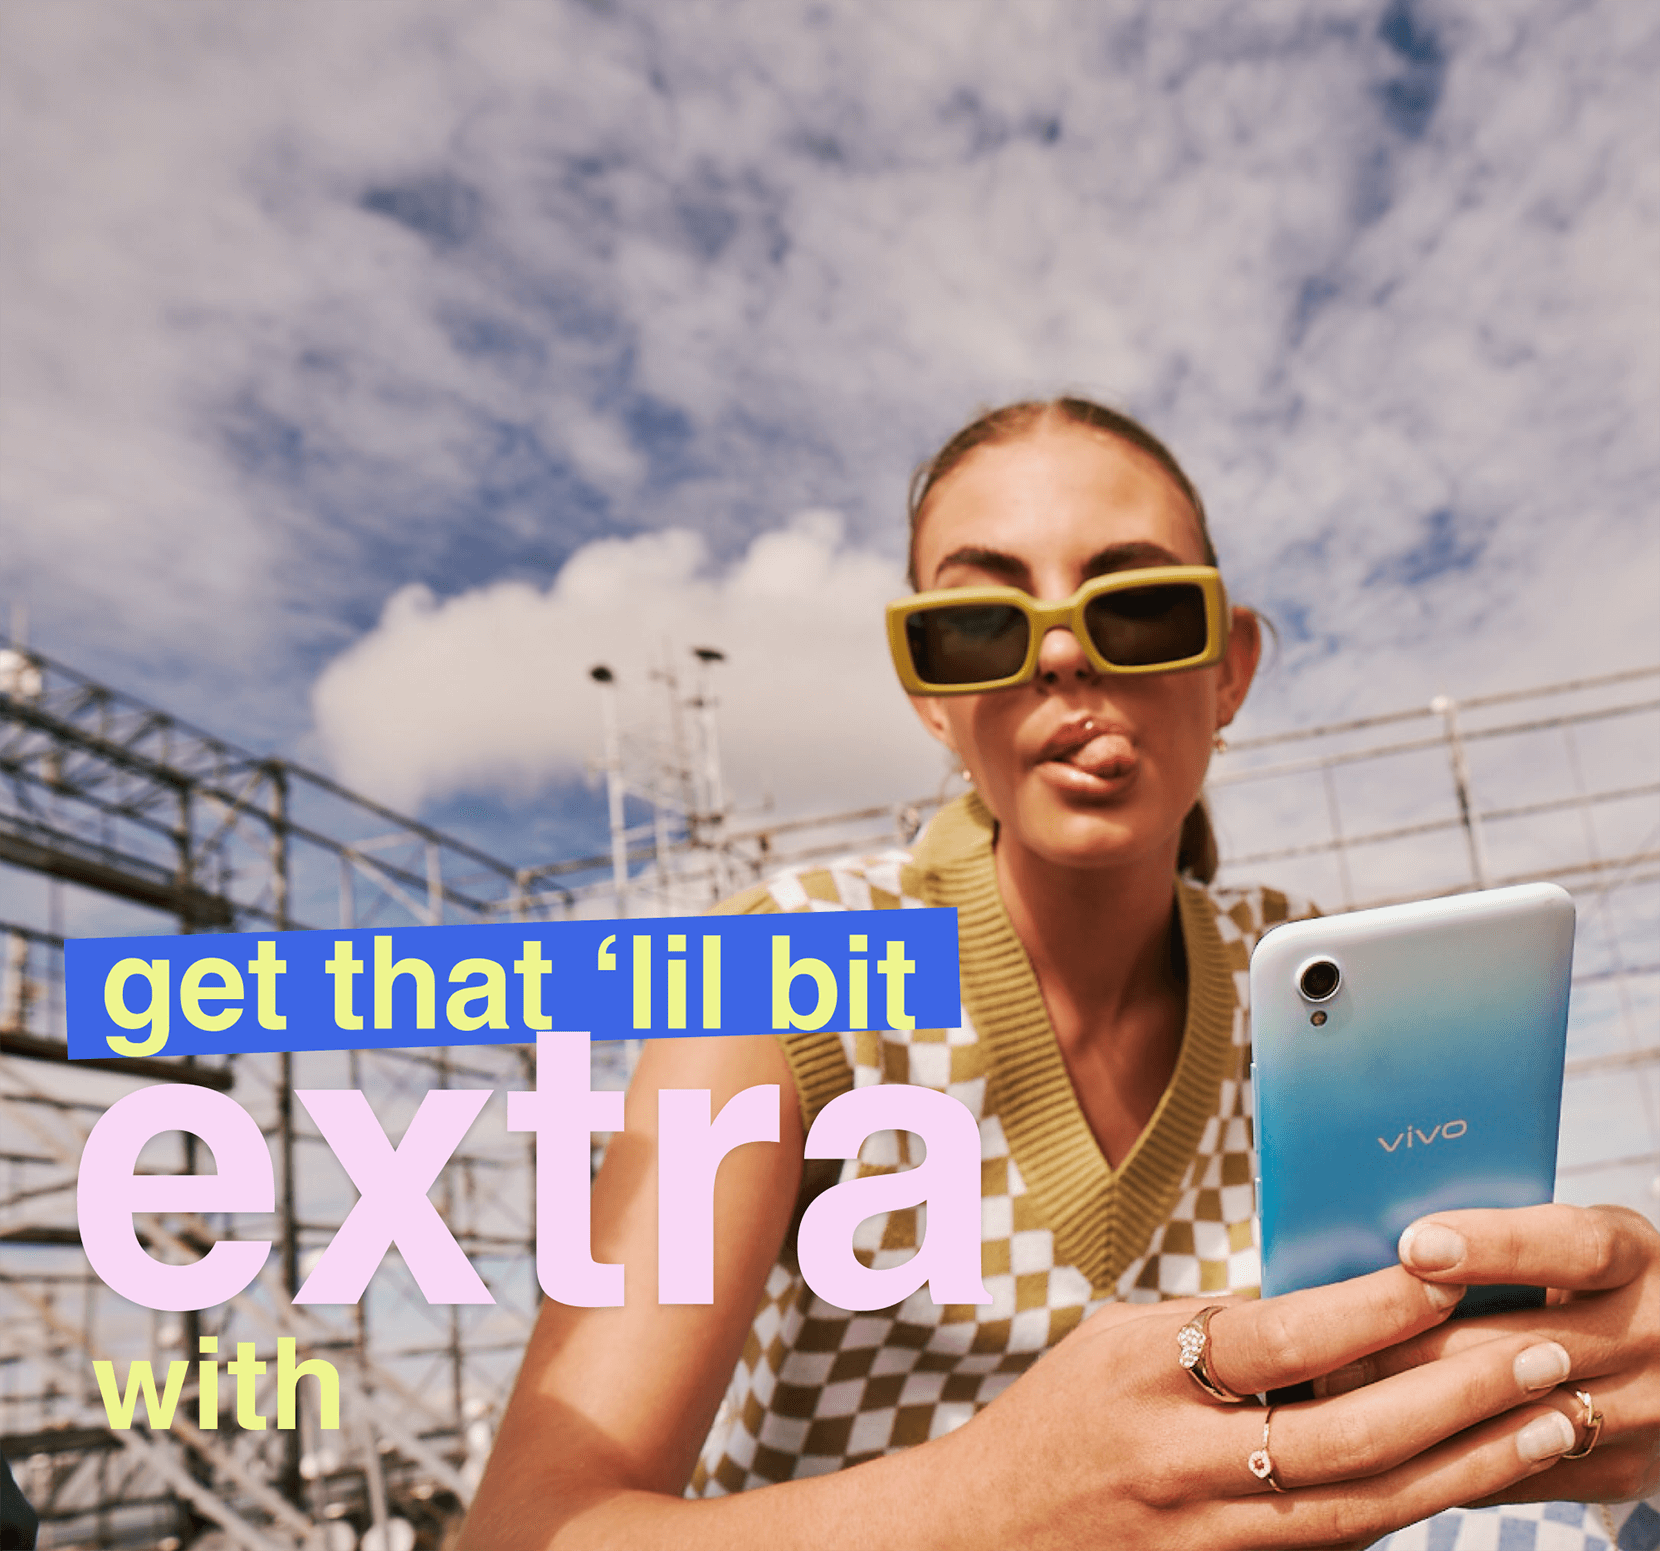 Mr Price Extras Airtime and Data